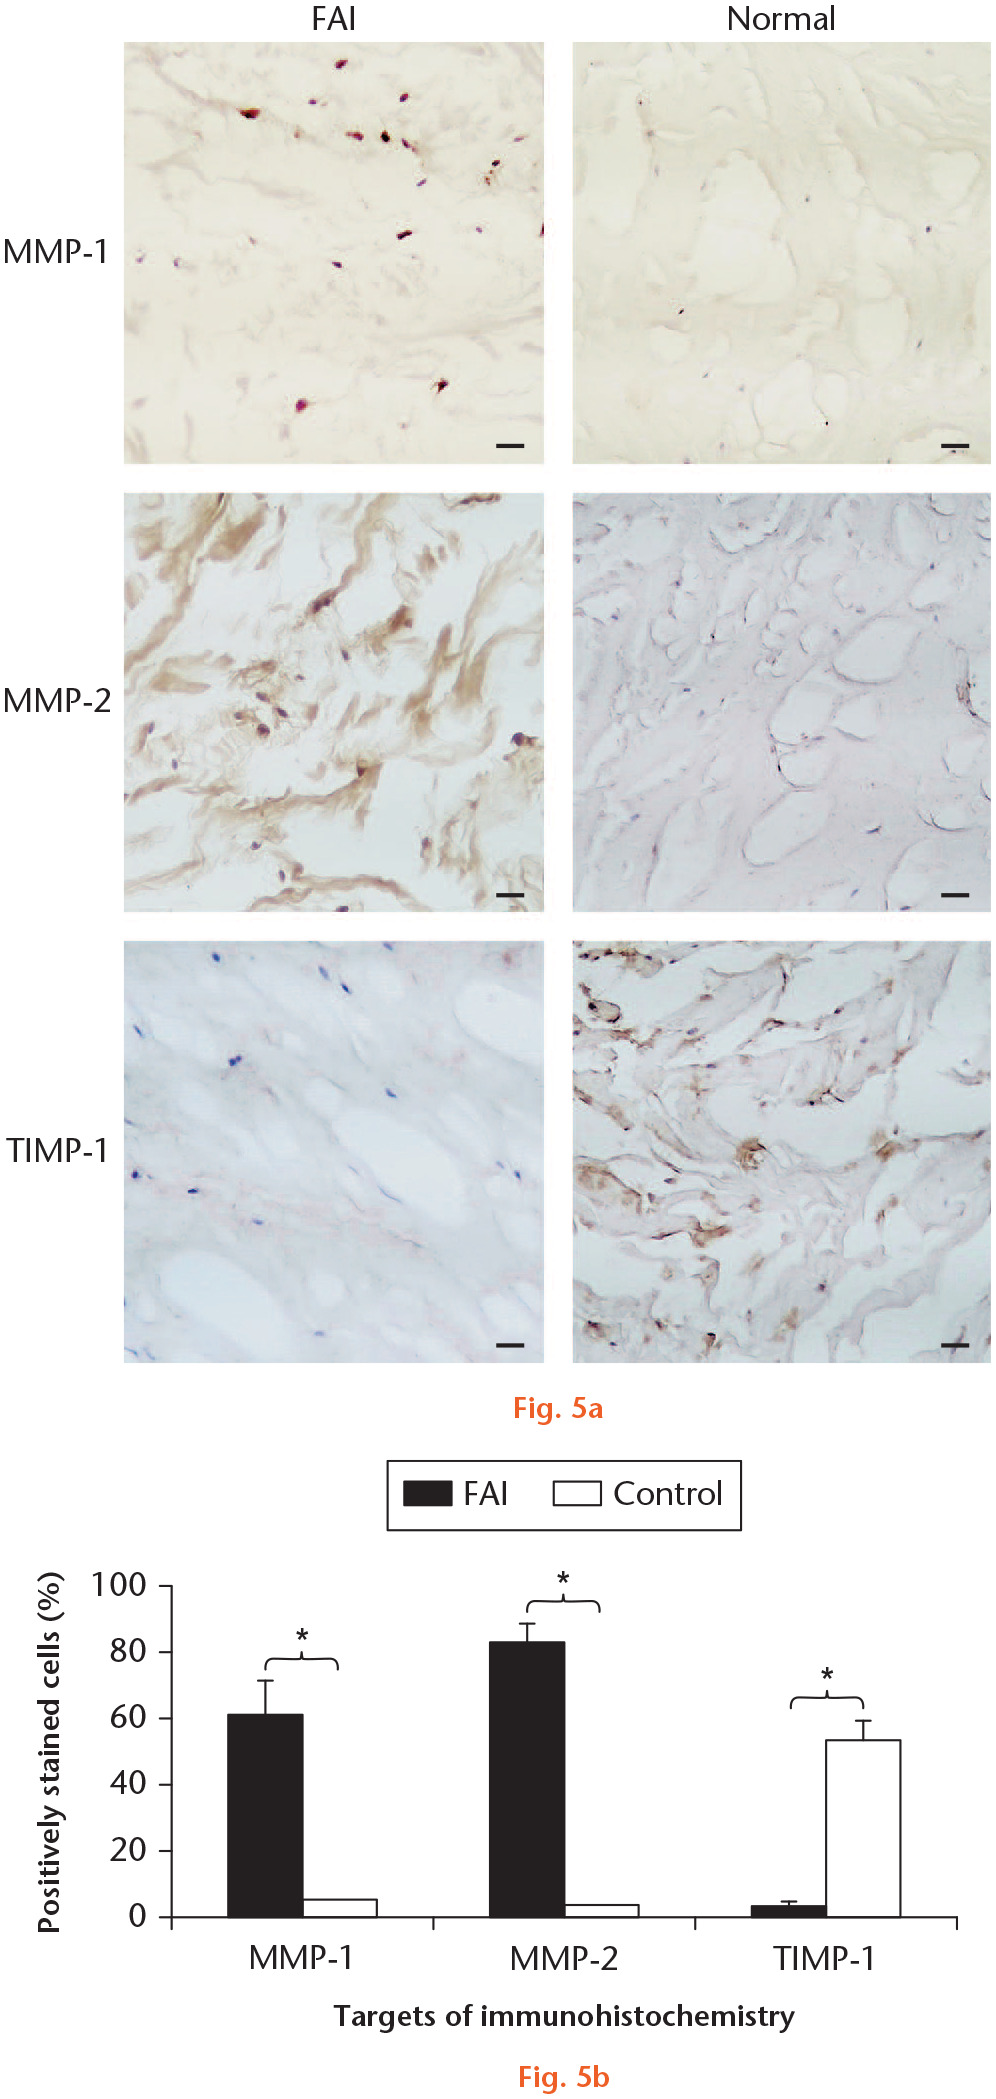 Fig. 5 
            a) Immunohistochemistry of matrix metalloproteinase (MMP)-1, MMP-2, and tissue inhibitor of metalloproteinases (TIMP)-1 in the central region of the normal and femoroacetabular impingement (FAI) labrums. Both MMP-1 and MMP-2 are detected in the central region of the FAI labrum but not in the normal controls. While MMP-1 is mostly stained intracellularly in the FAI labrum, MMP-2 is detected both intracellularly and extracellularly. TIMP-1 is detected in the normal labrum but not in the FAI labrum. b) The percentages of MMP-1 and MMP-2 positive cells in the central region of the FAI labrum are significantly greater than those in the normal labrum. The percentage of TIMP-1 positive cells in the central region of the FAI labrum is significantly reduced compared with the normal labrum. Bars represent 50 µm (original magnification 200×). Nuclei are counter-stained with haematoxylin. *p < 0.05.
          